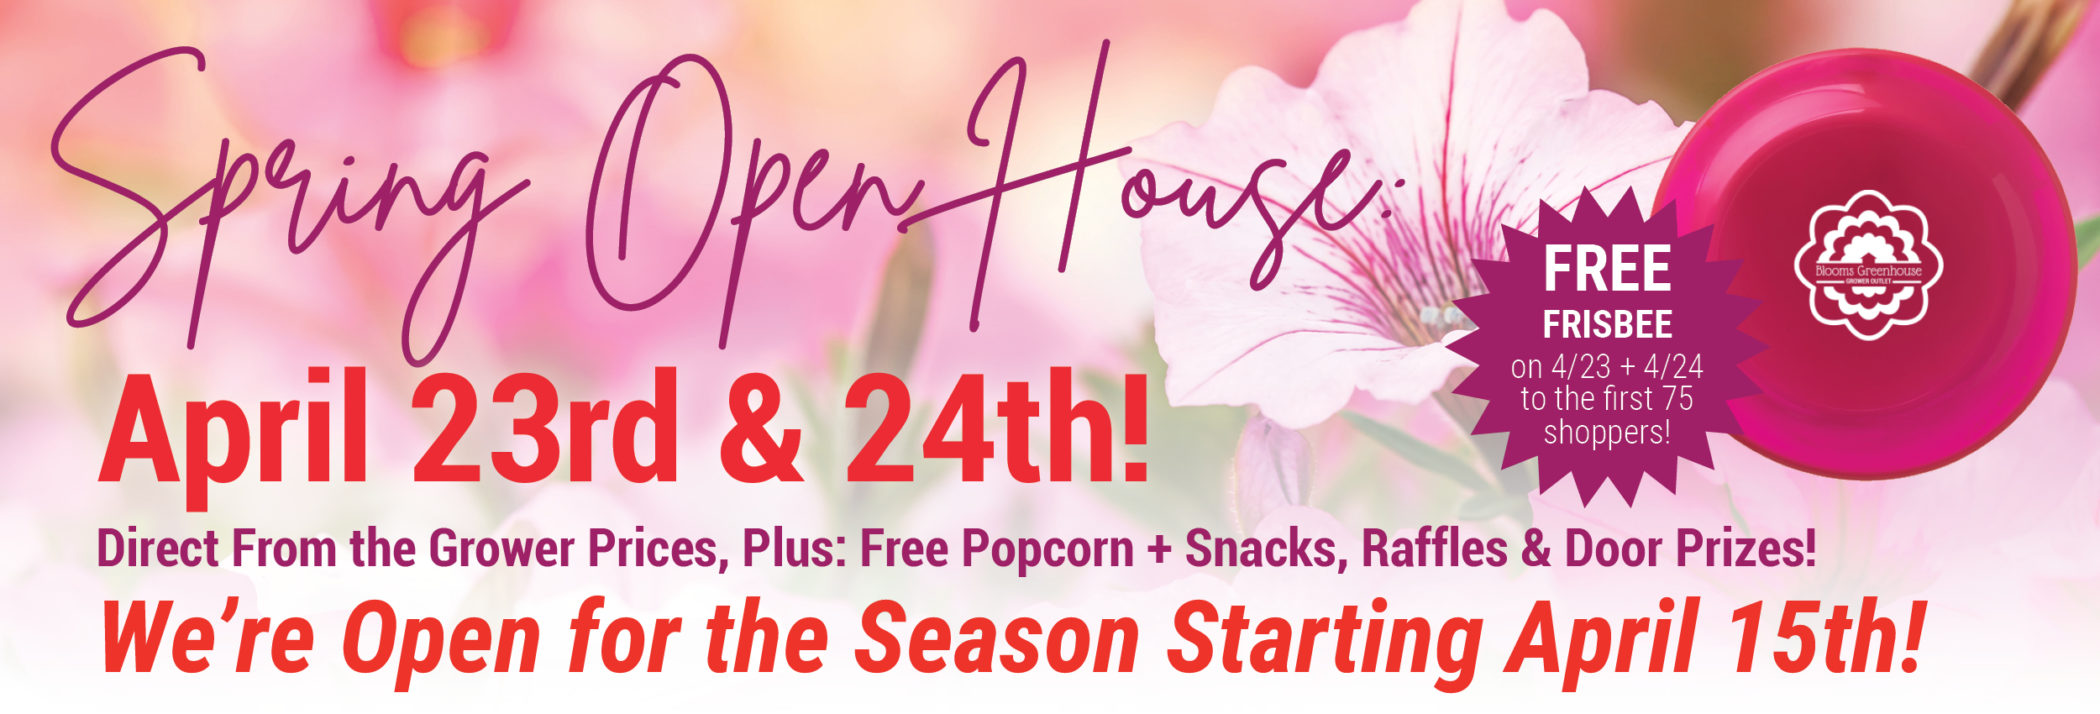 2022 Blooms Greenhouse Spring Open House on April 23rd & 24th!